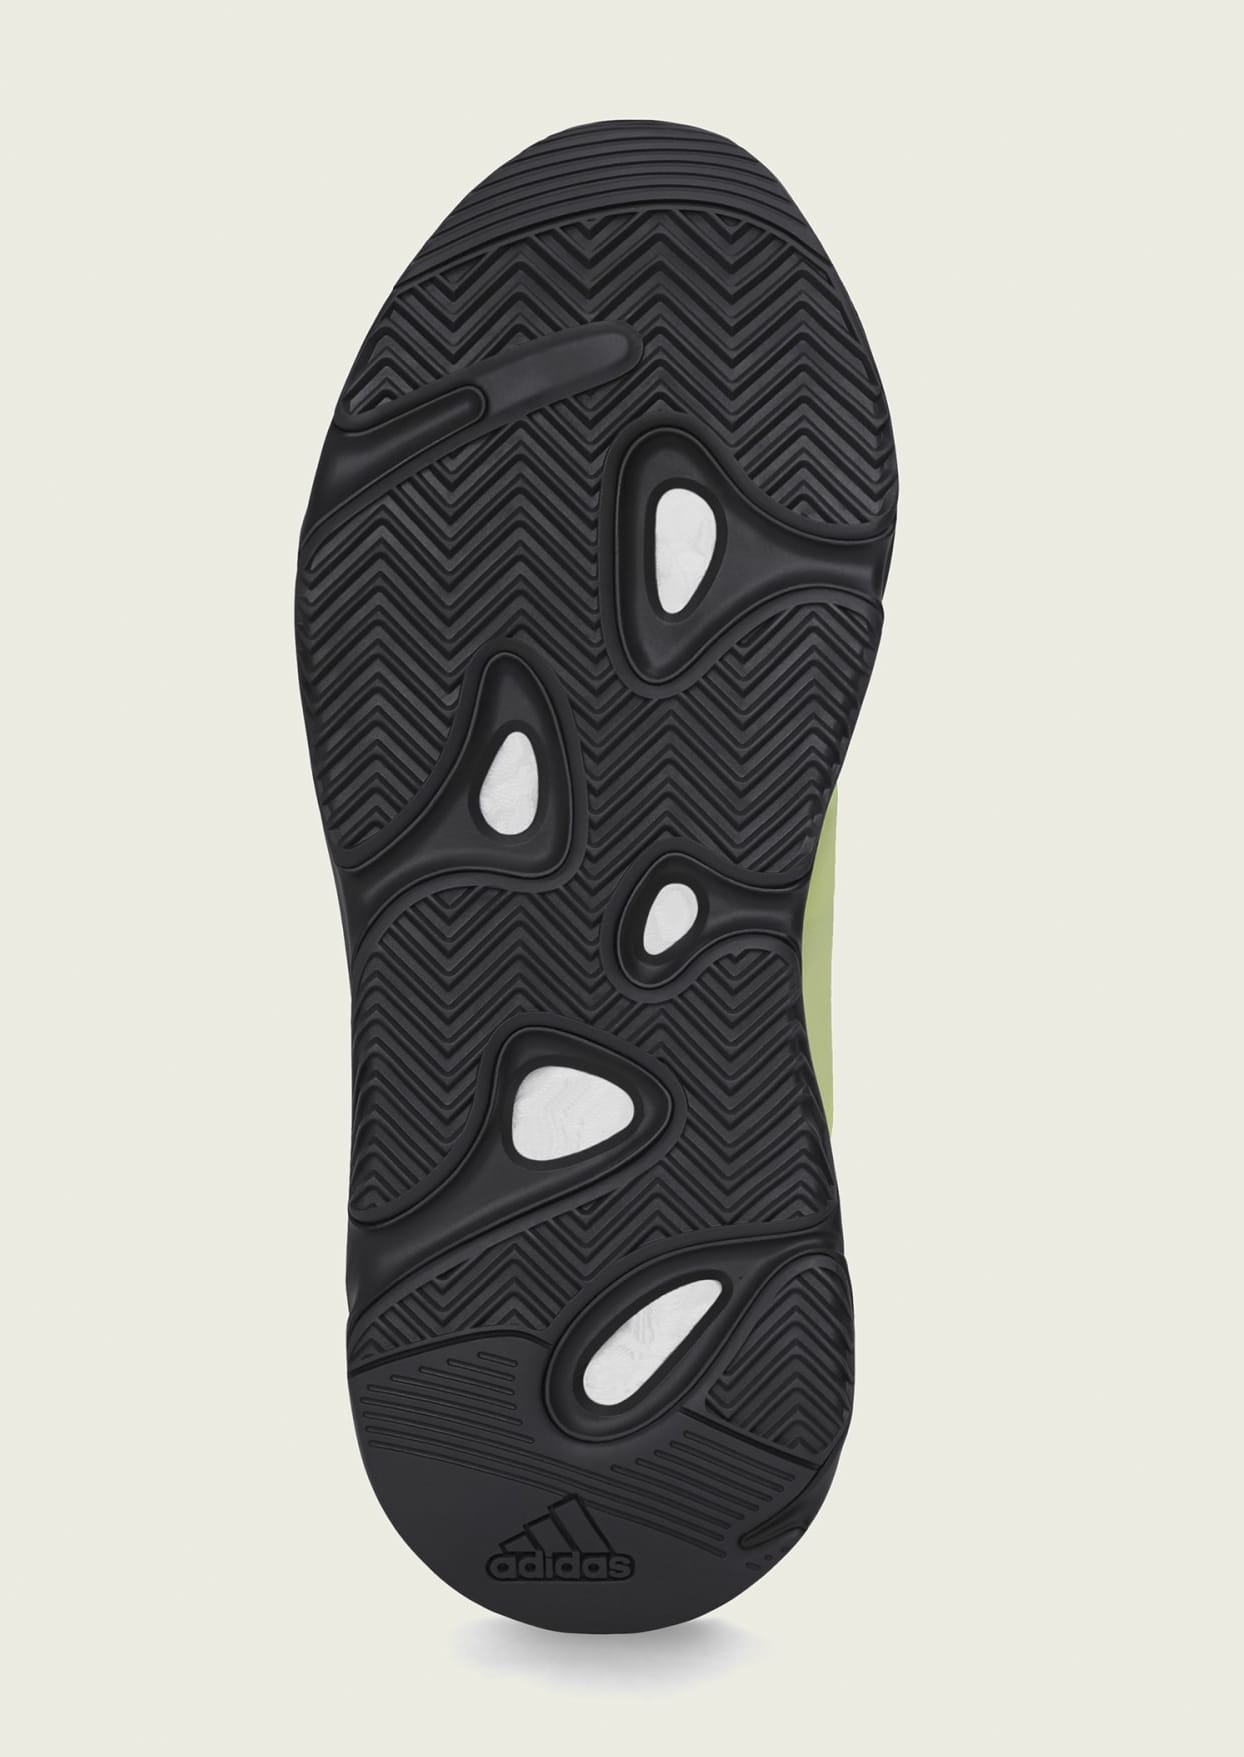 Adidas Yeezy Boost 700 MNVN 'Phosphor' FY3727 Outsole